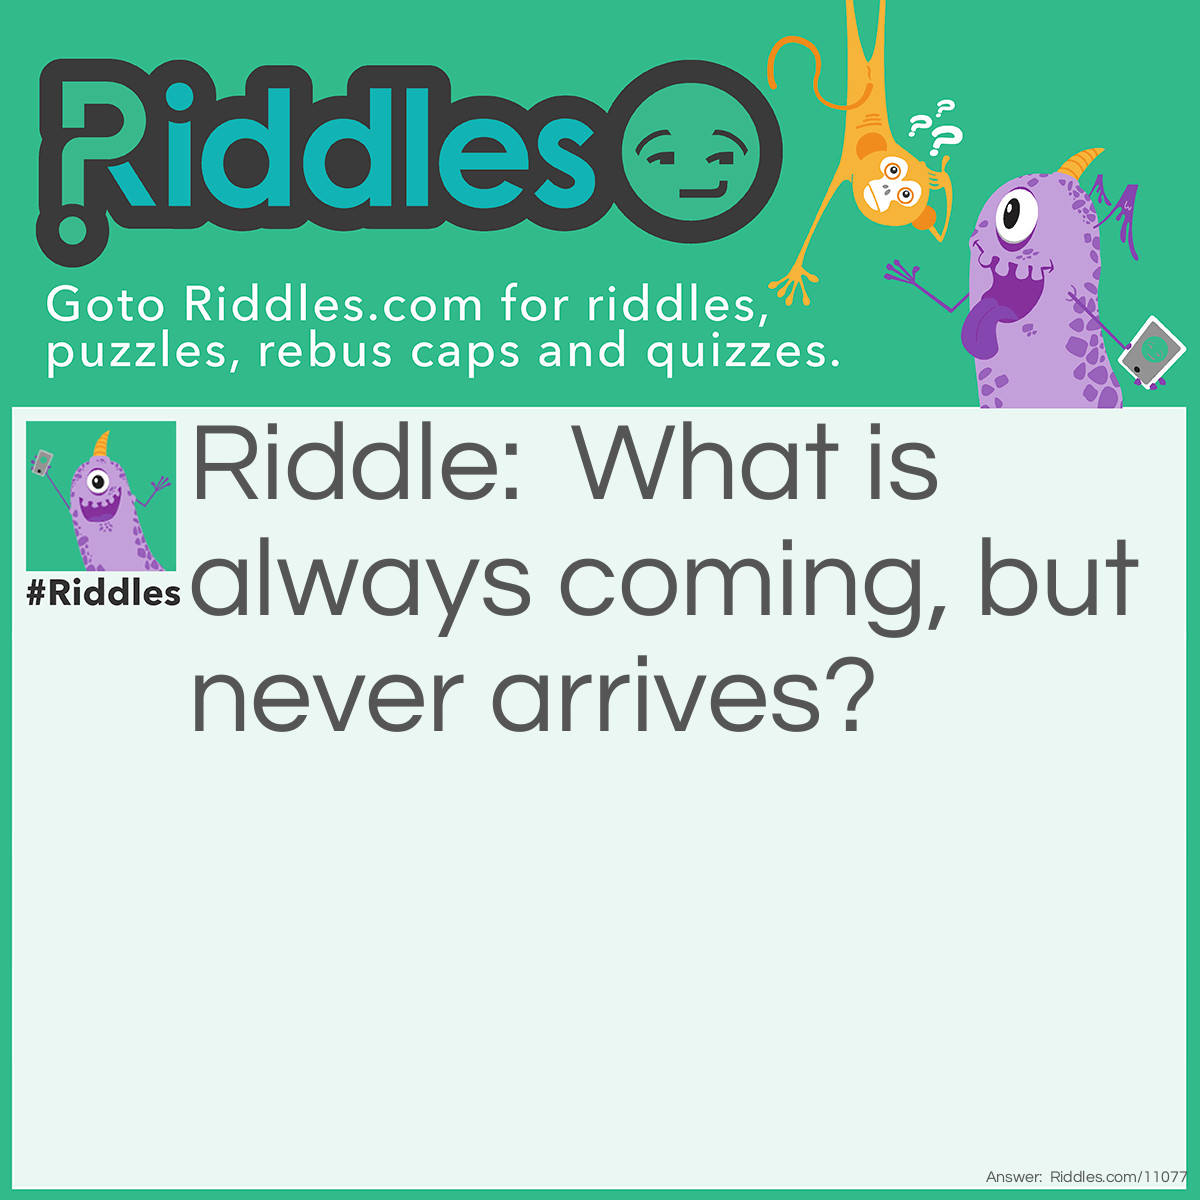 Riddle: What is always coming, but never arrives? Answer: Tomorrow